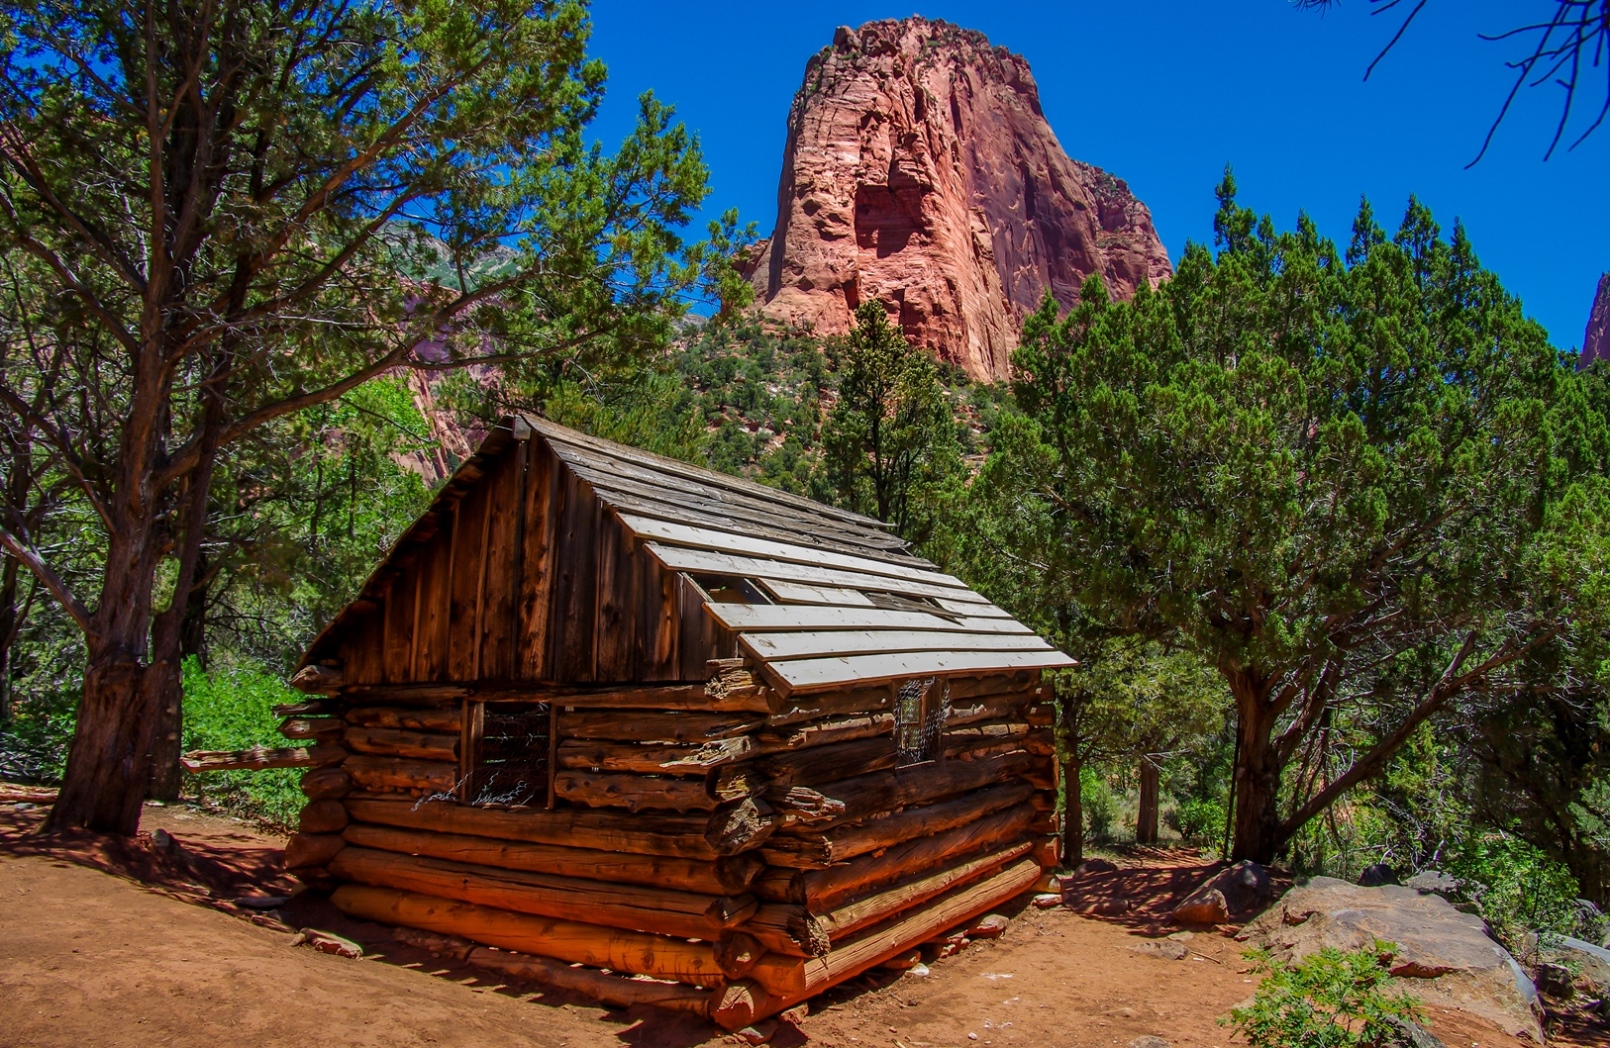 Wood Cabin Along Taylor Creek Trail In Kolob Canyon Section Of Zion National Park, UT